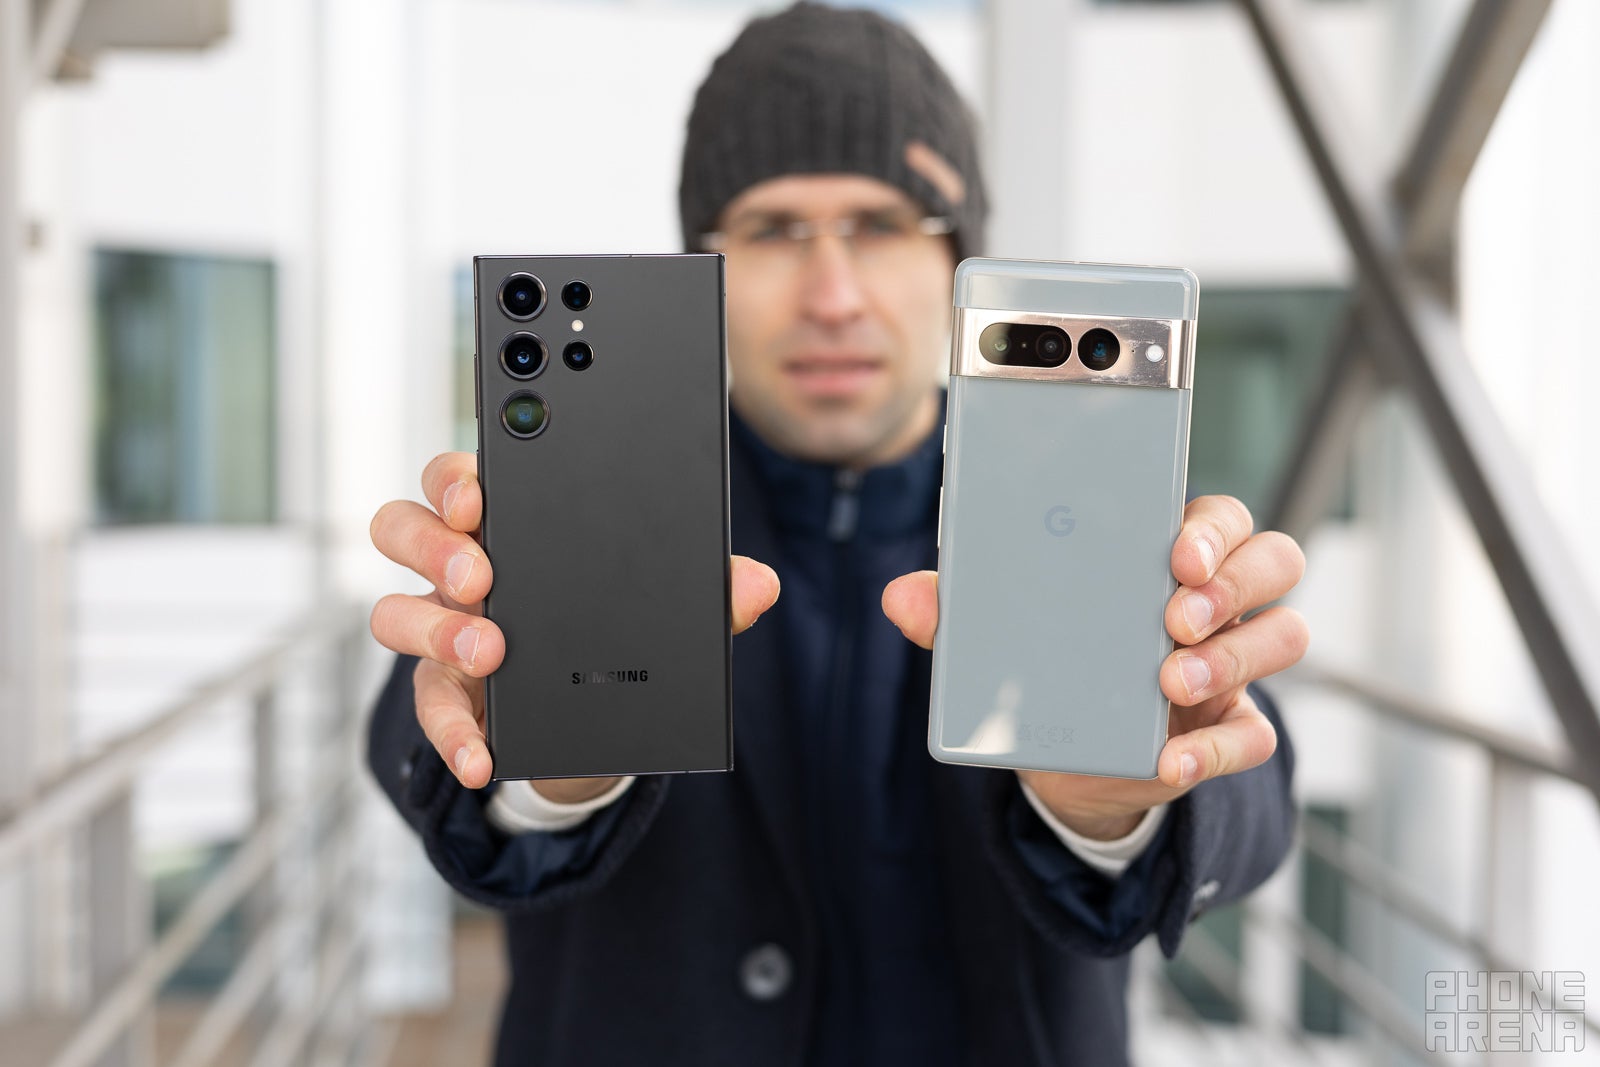 Samsung Galaxy S23 Ultra vs. Google Pixel 7 Pro: Which Android